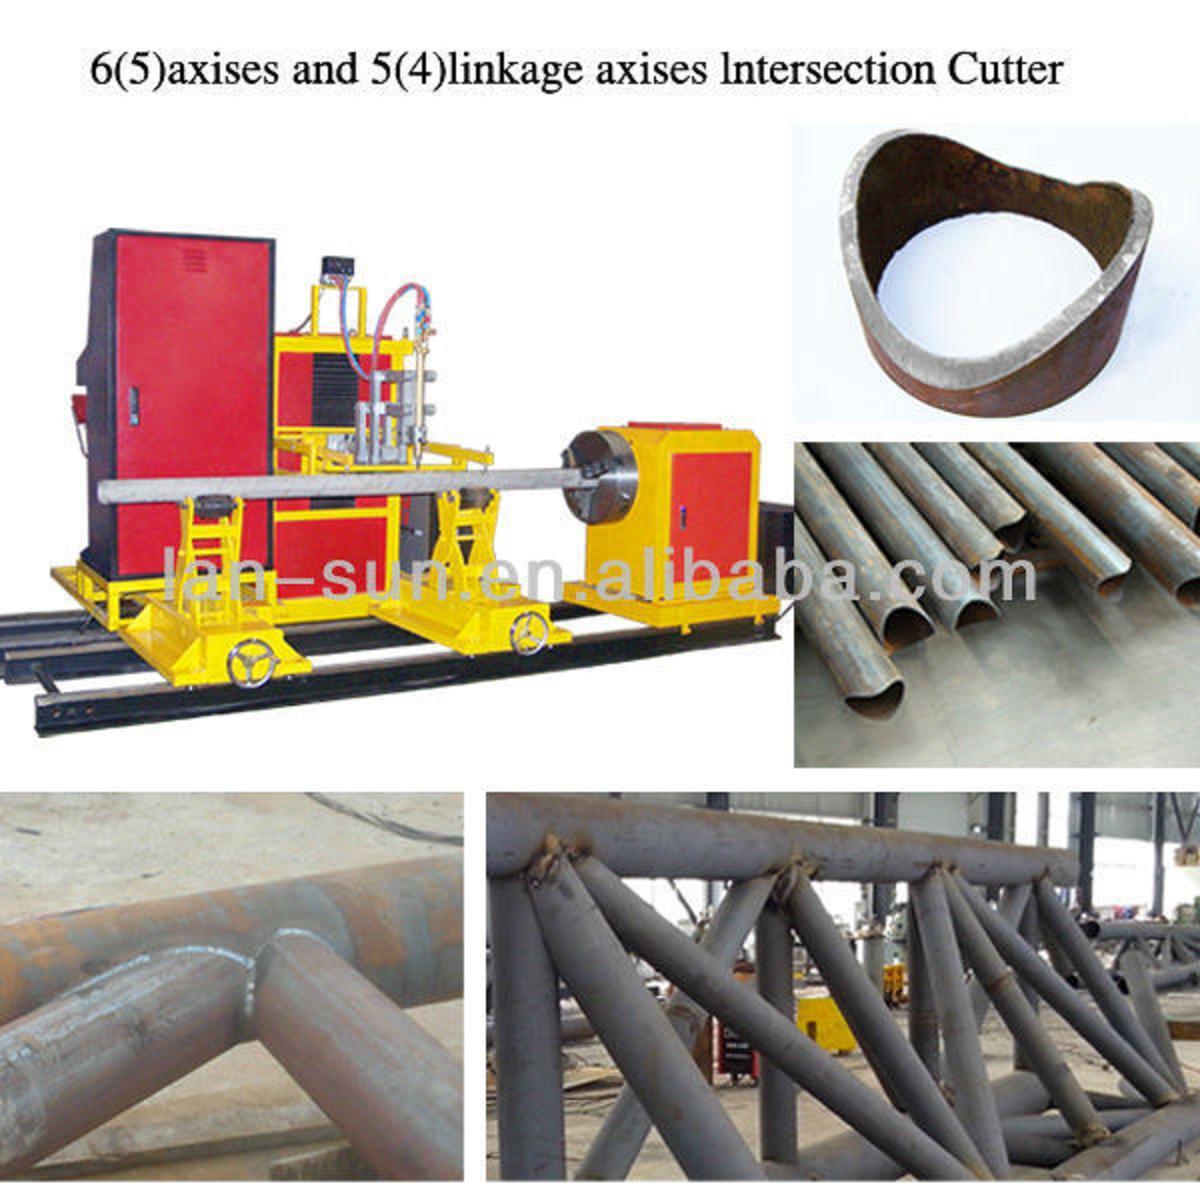 Contruction Building Pipe Tube Cutting Machine Cutter Tools with Air Plasma Flame Gas Bevel Intersection Groove Cutting for All Kind Material Pipe